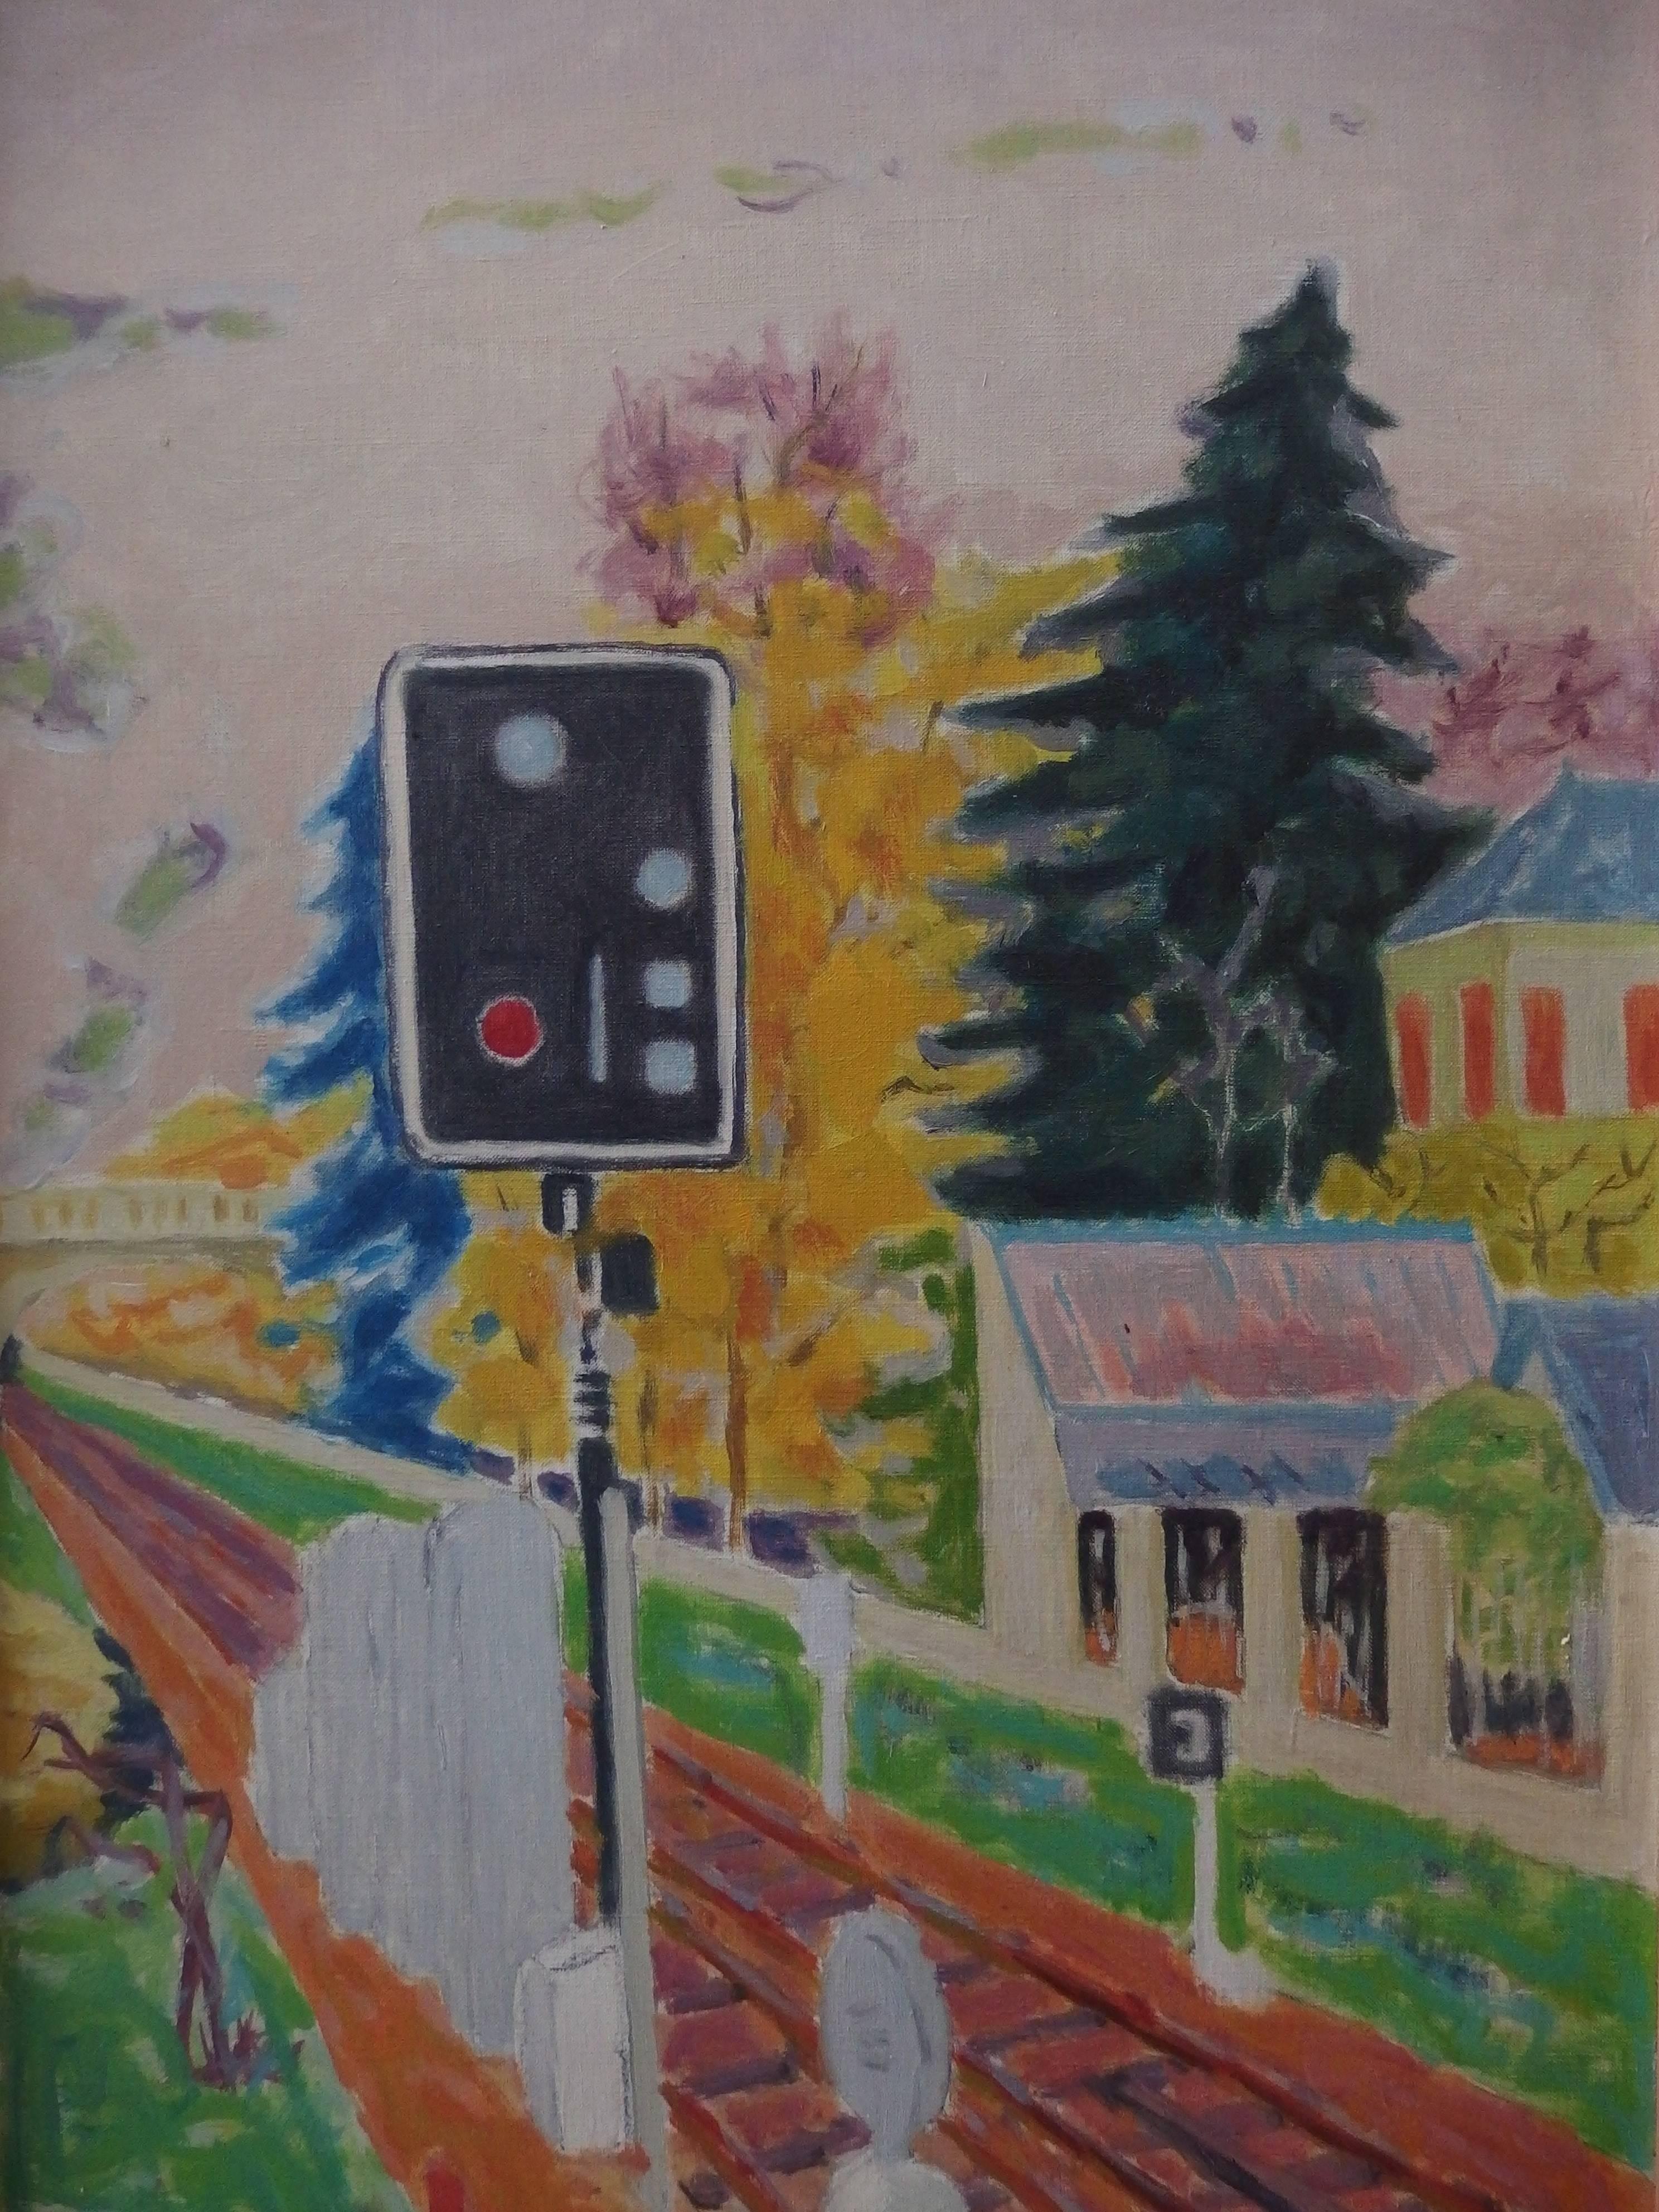 Railway : The Signal - Original oil on canvas - Signed - Realist Painting by Jules Cavailles